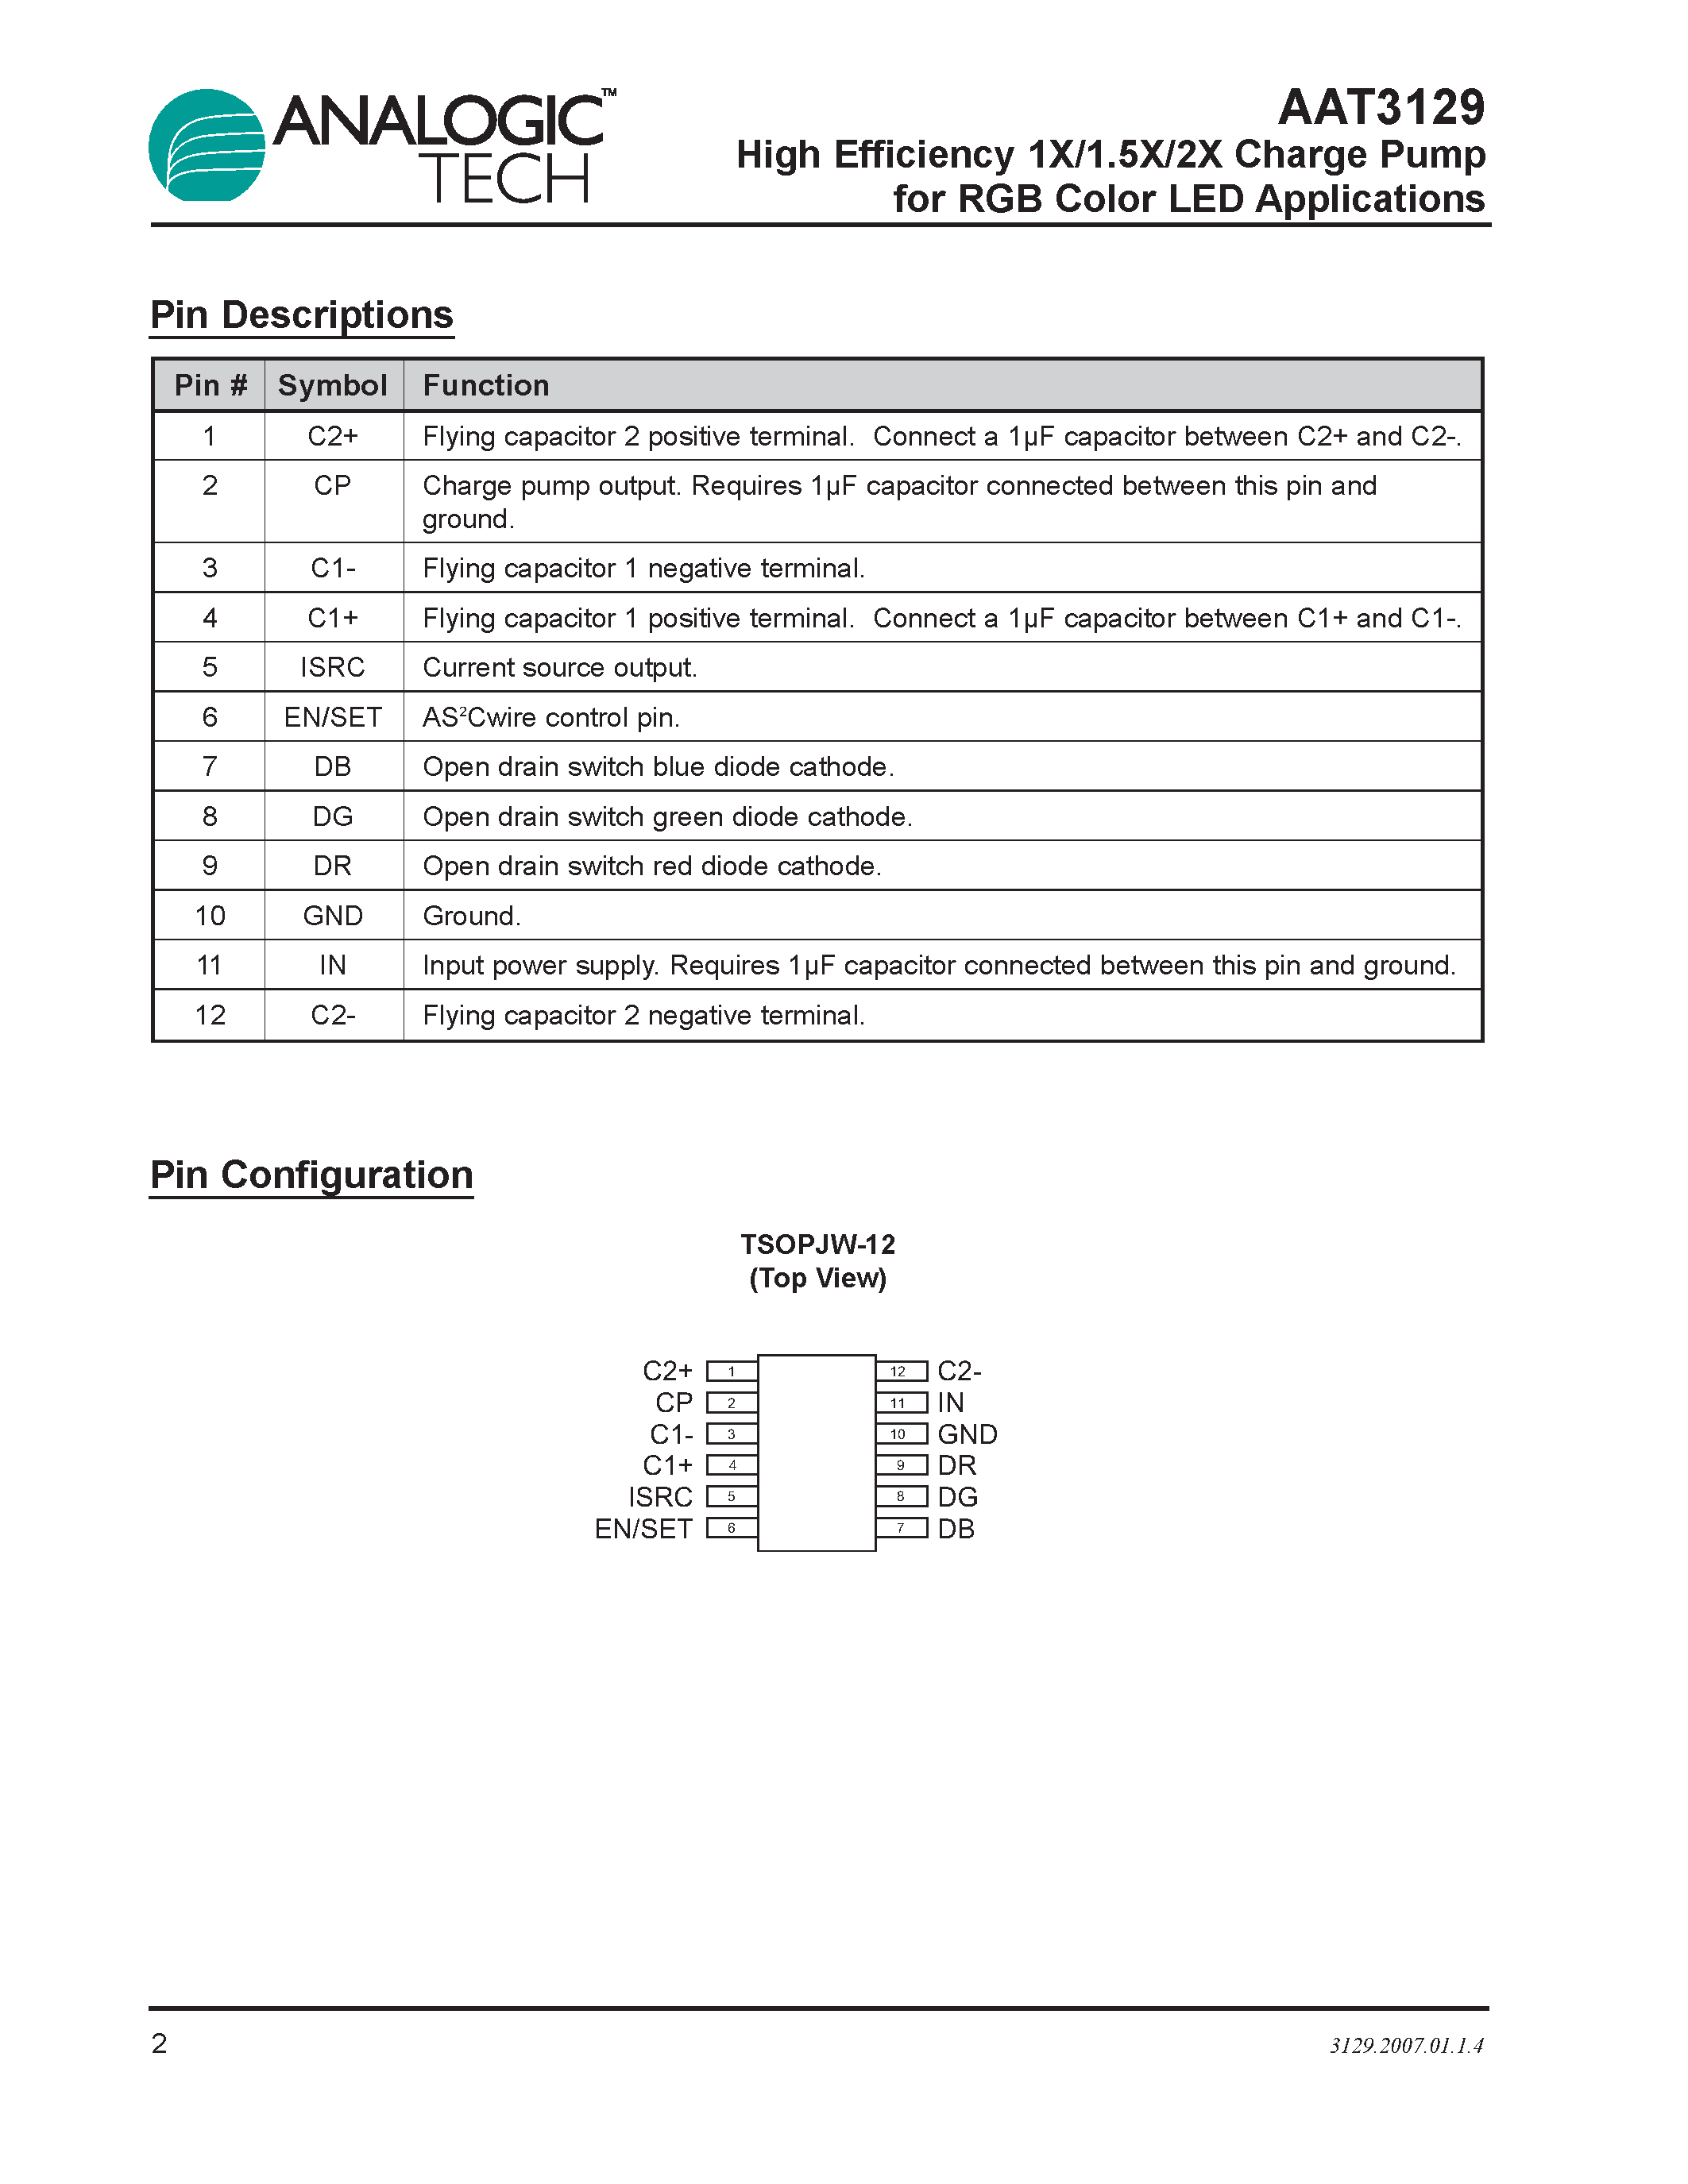 Datasheet AAT3129 - High Efficiency 1X/1.5X/2X Charge Pump page 2